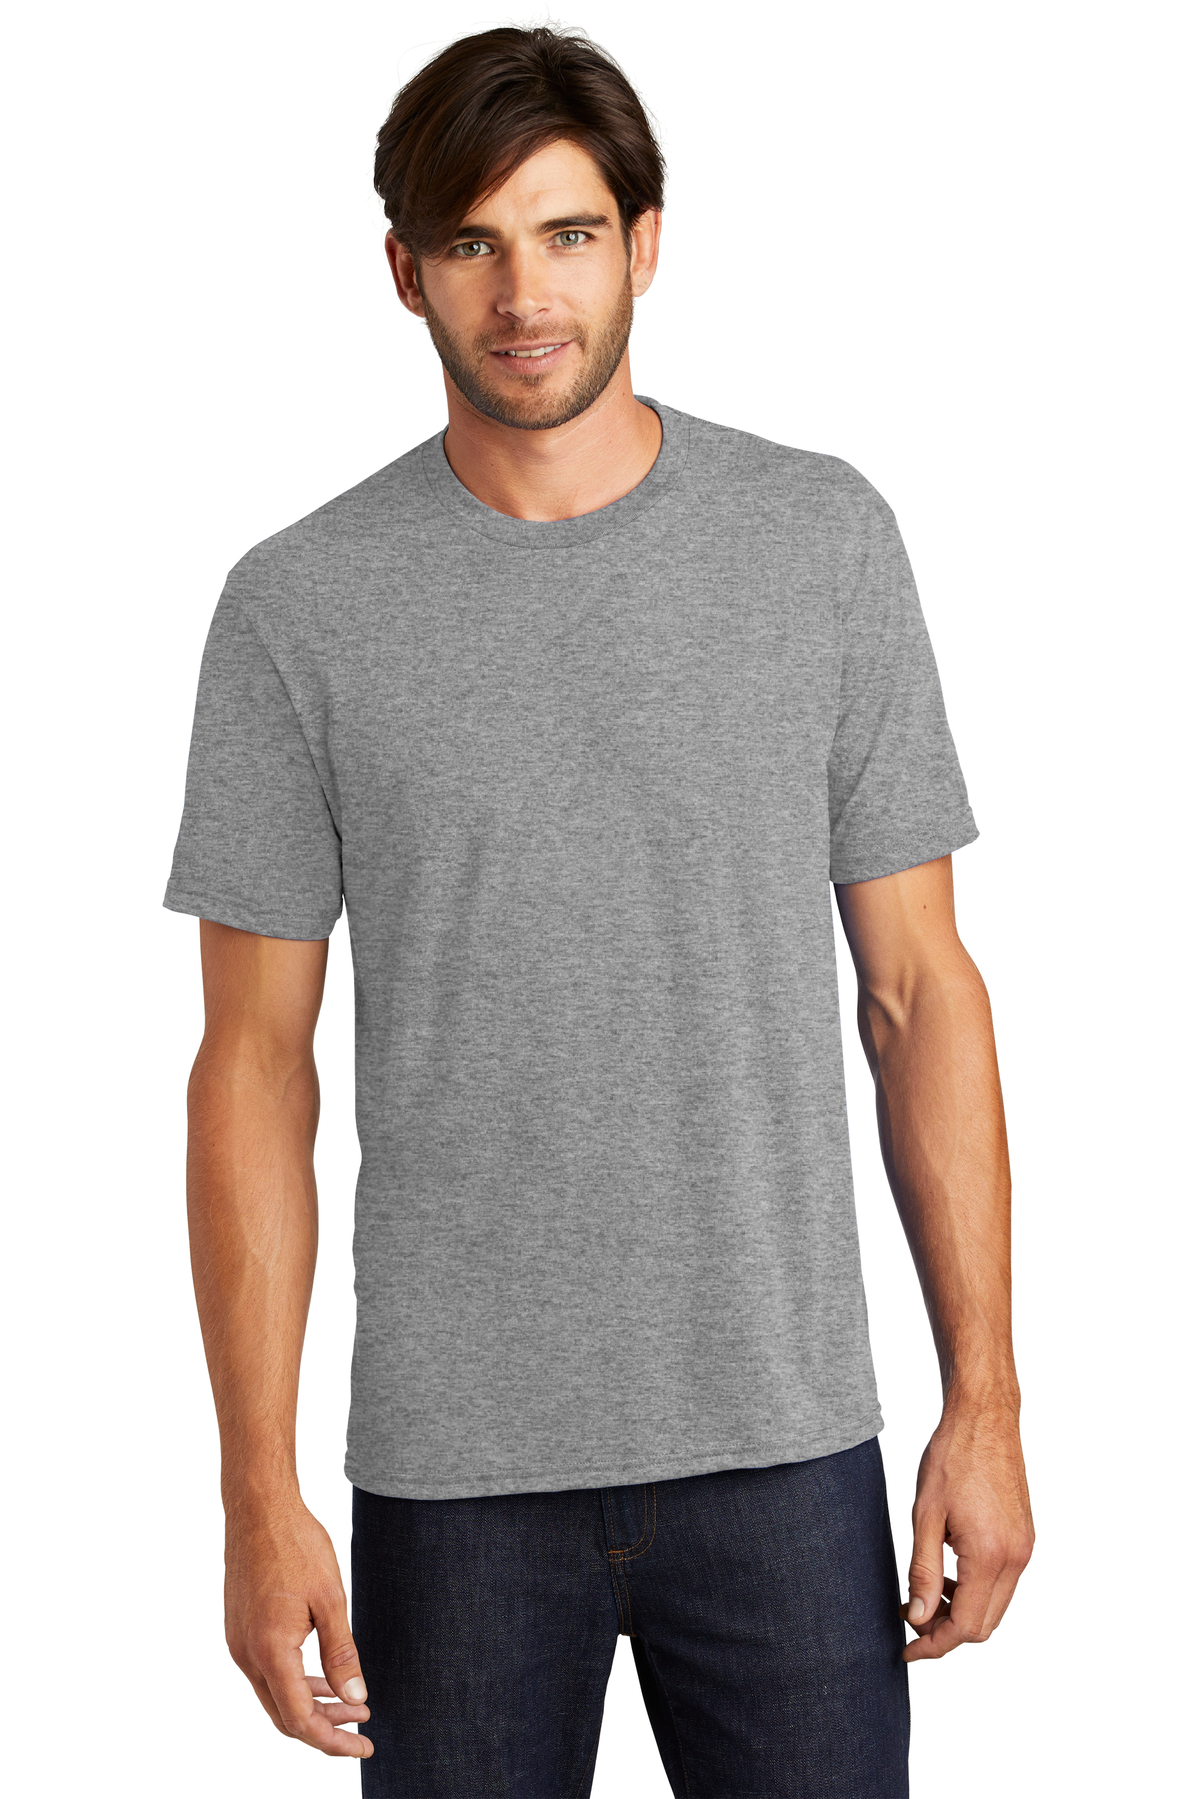 District Printed Men's Perfect TriBlend Tee - Queensboro